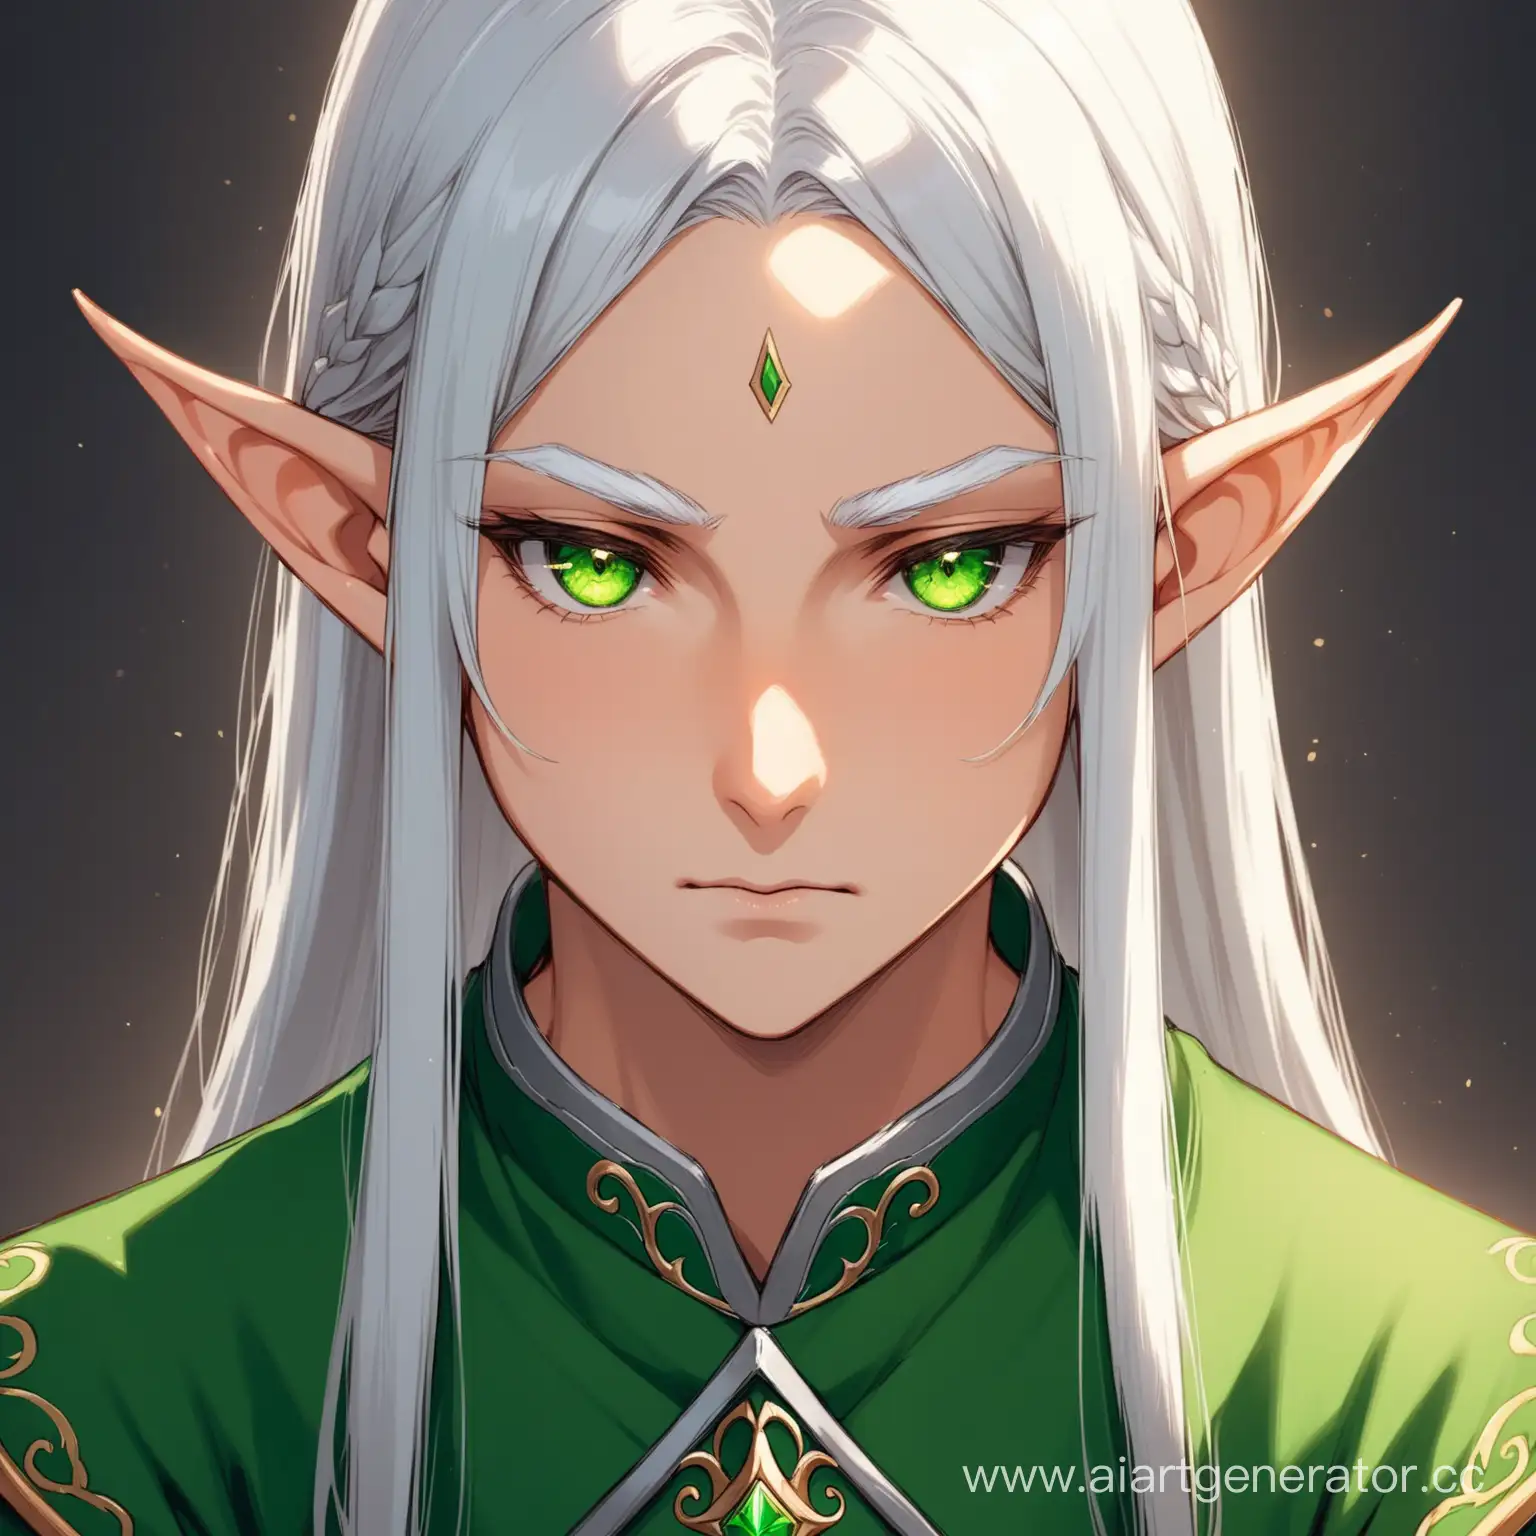 Arrogant-Young-Elf-Portrait-with-Silver-Hair-and-Green-Eyes